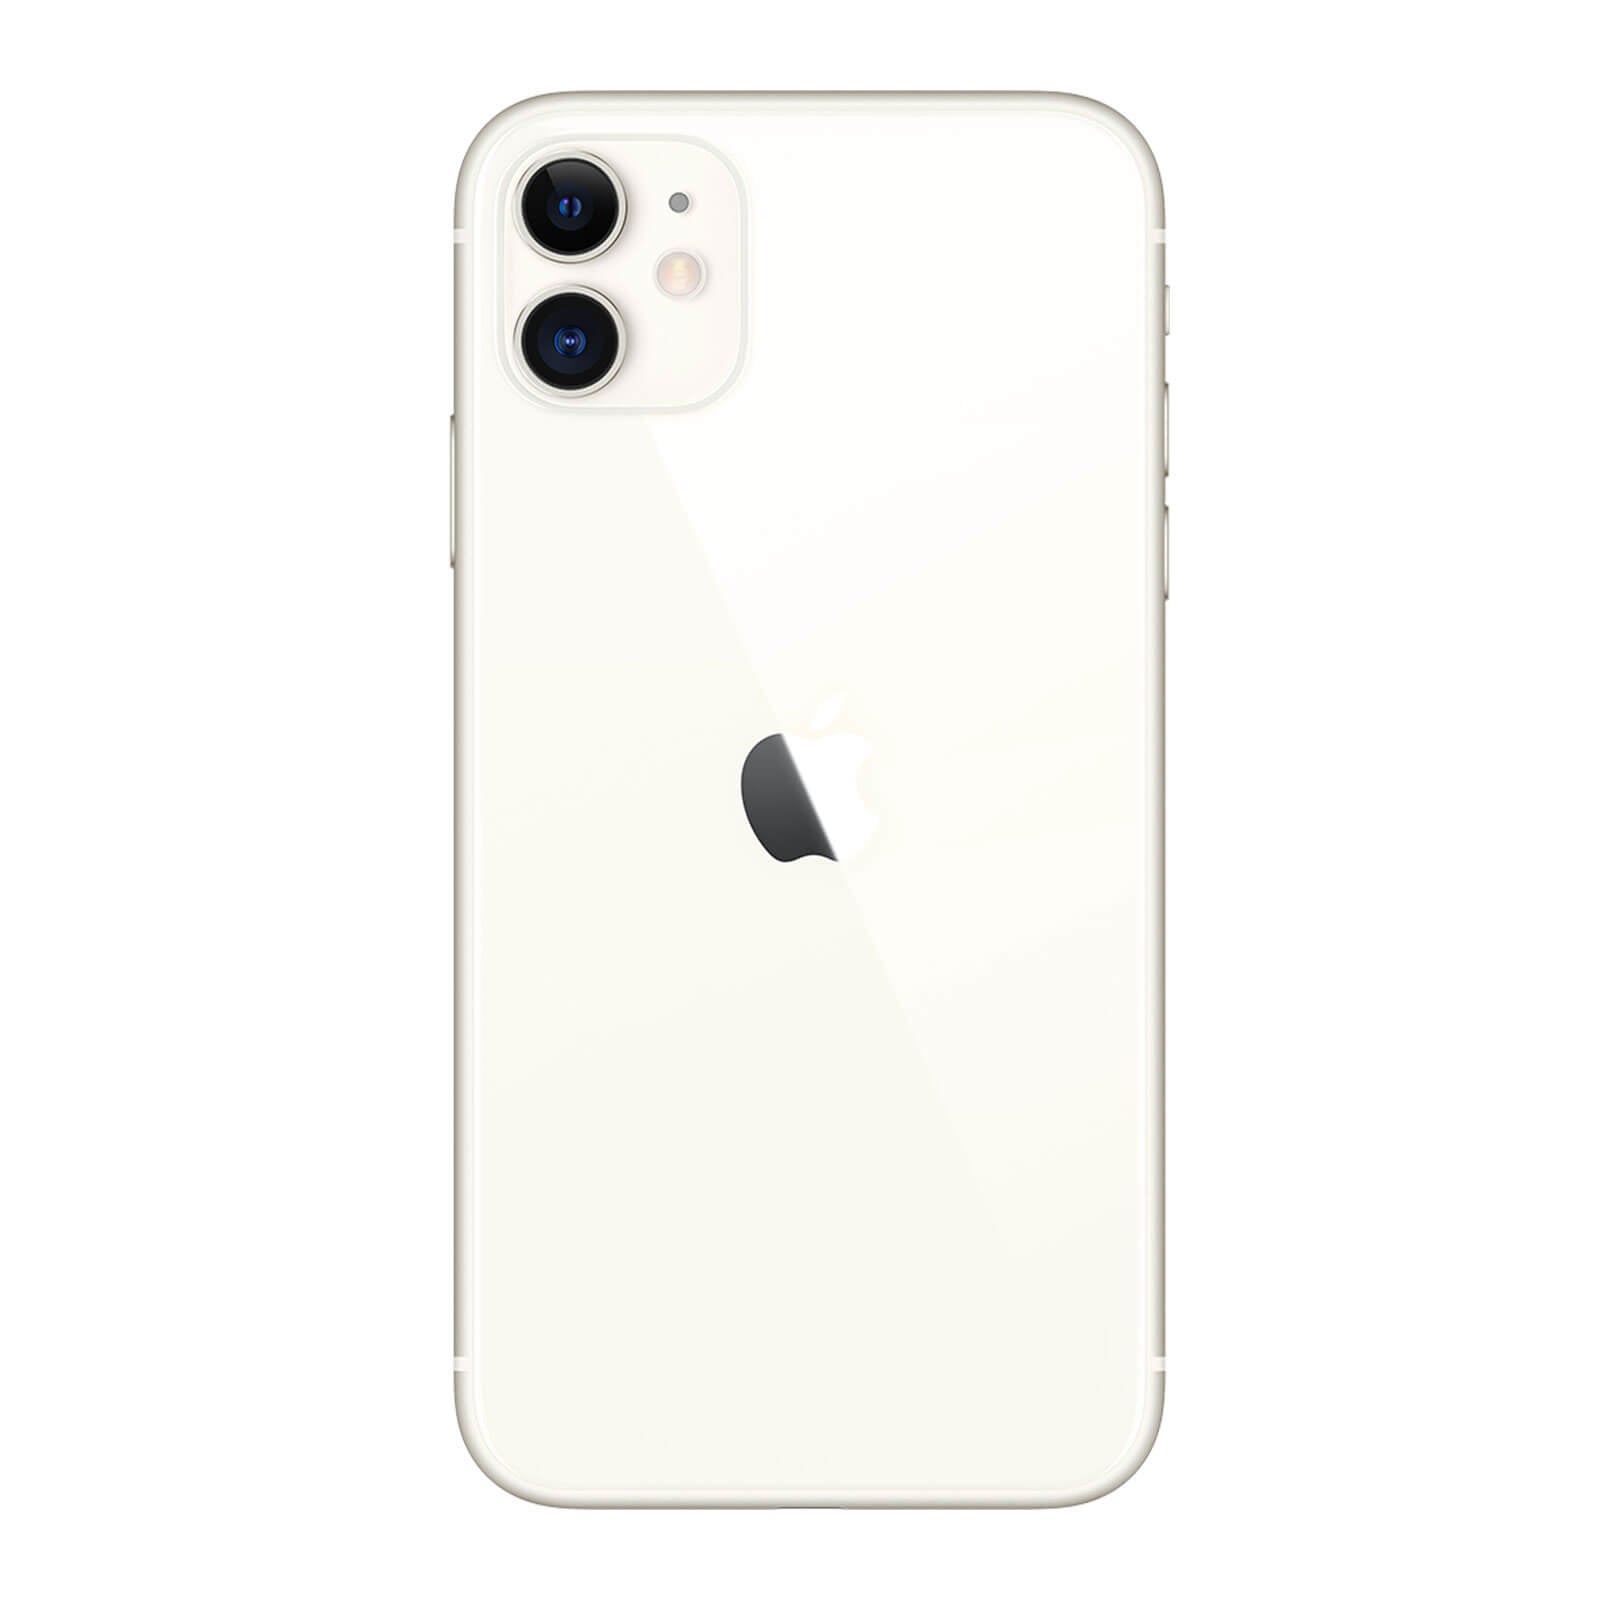 Apple iPhone 11 128GB White Good - AT&T